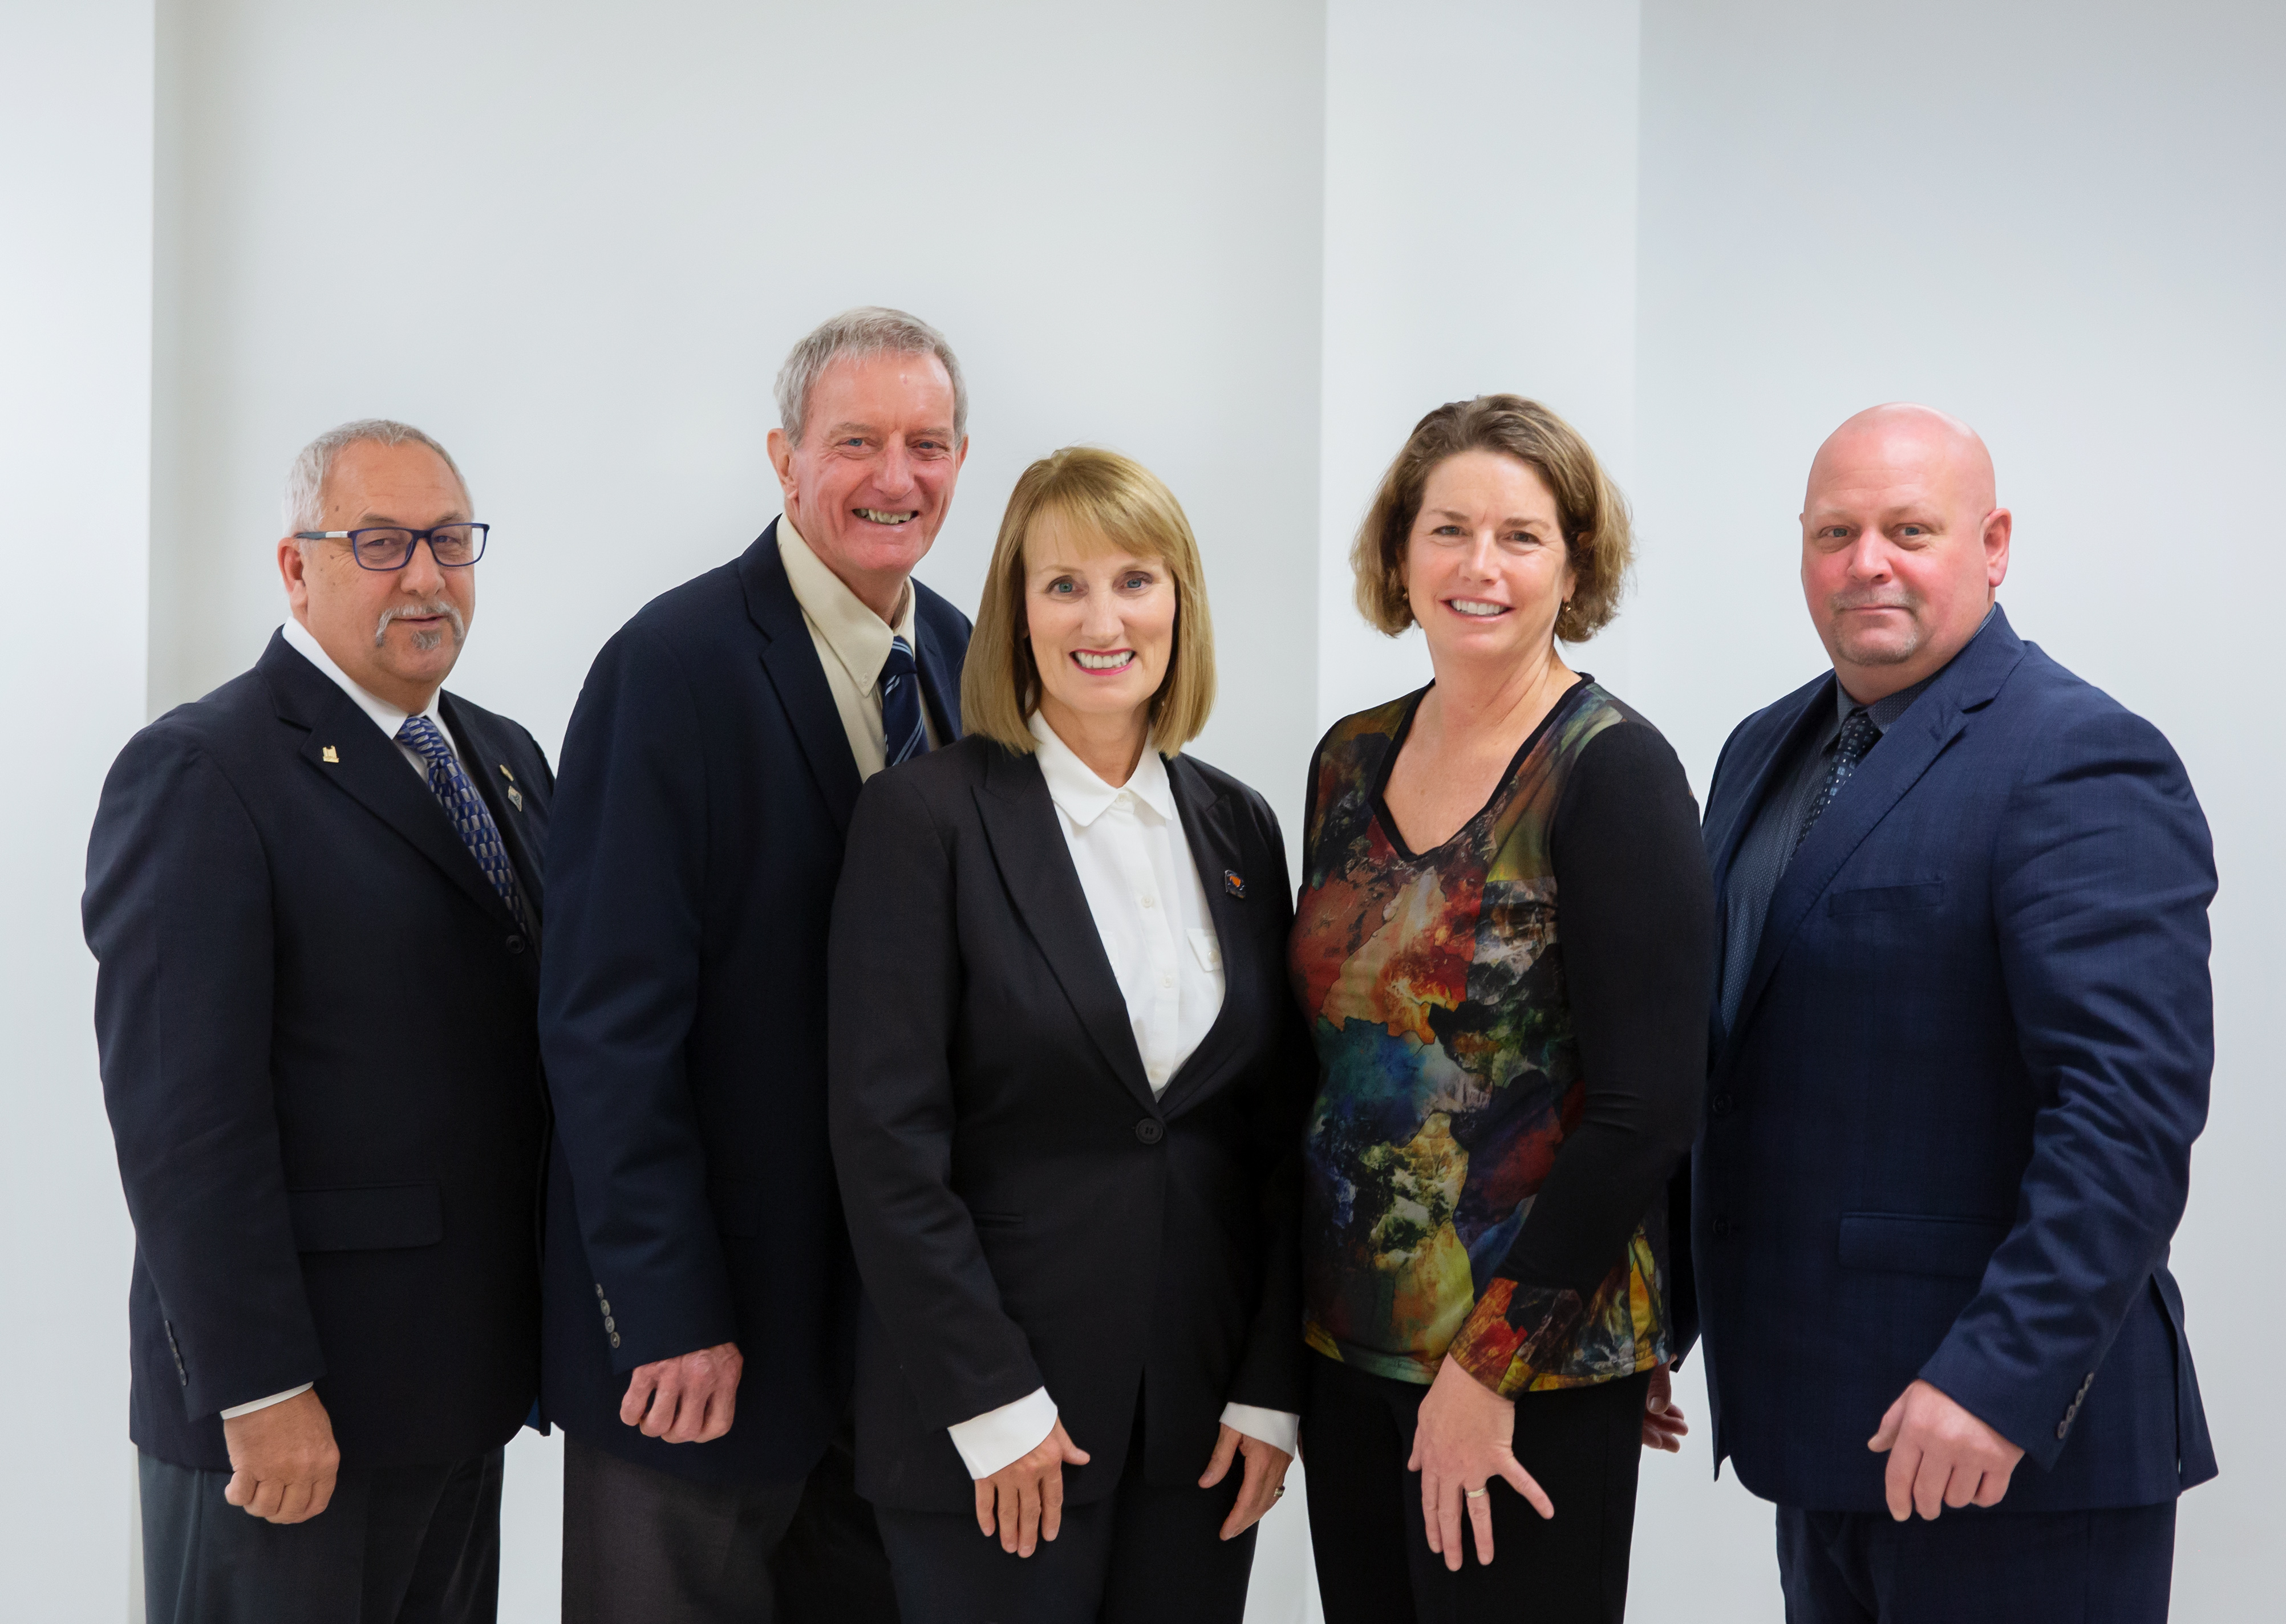 From left to right the people are: Councilor Terry Kelly, Councilor Steven Trahan, Councilor Erika Lougheed, Deputy Mayor Michel Voyer, Mayor Pauline Rochefort, CAO Jason Trottier 